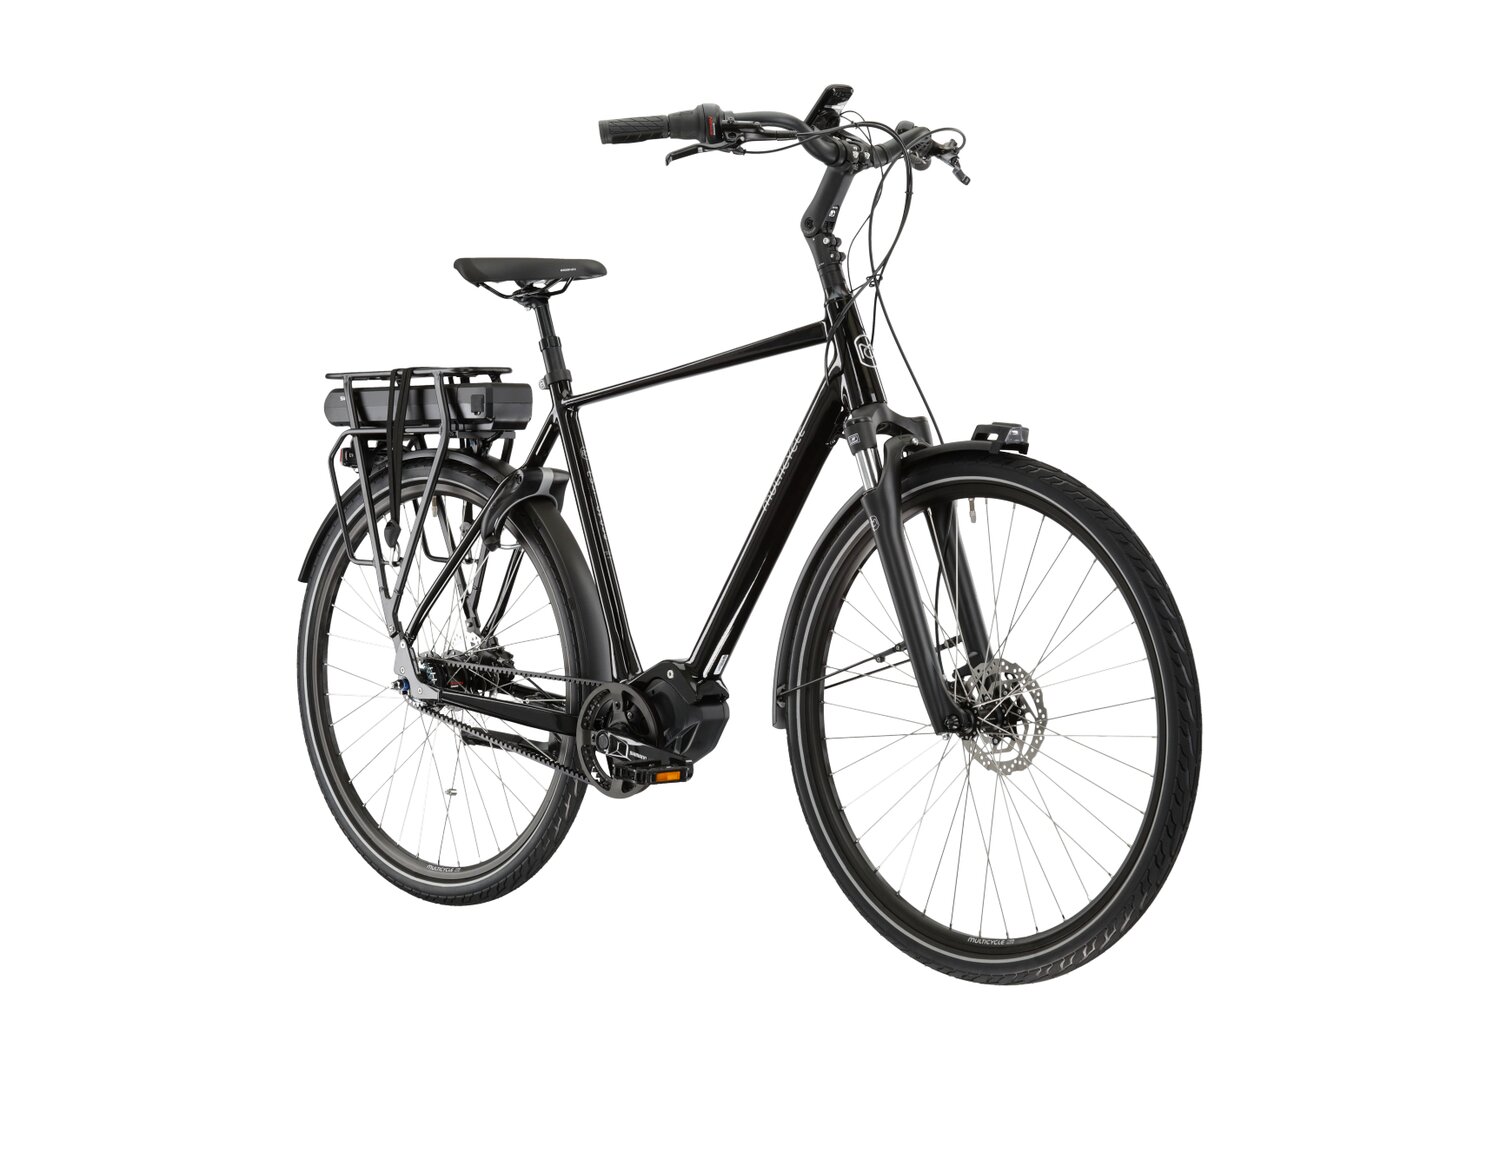 Solo EMB Multicycle 504 Wh